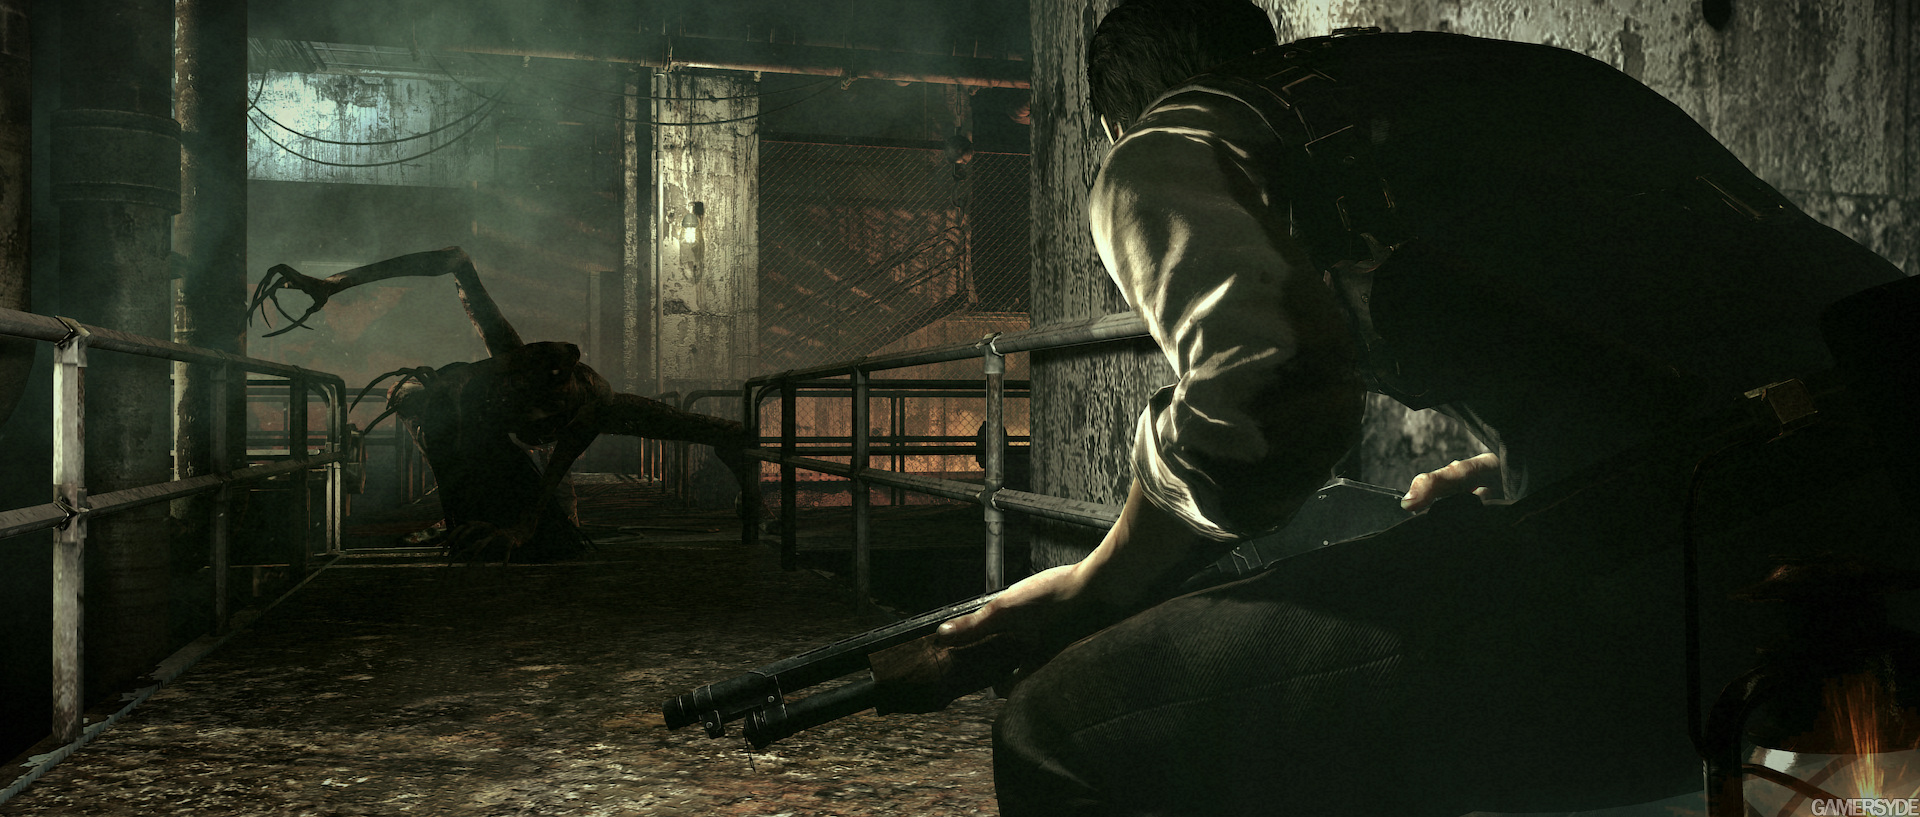 image_the_evil_within-25967-2706_0004.jp